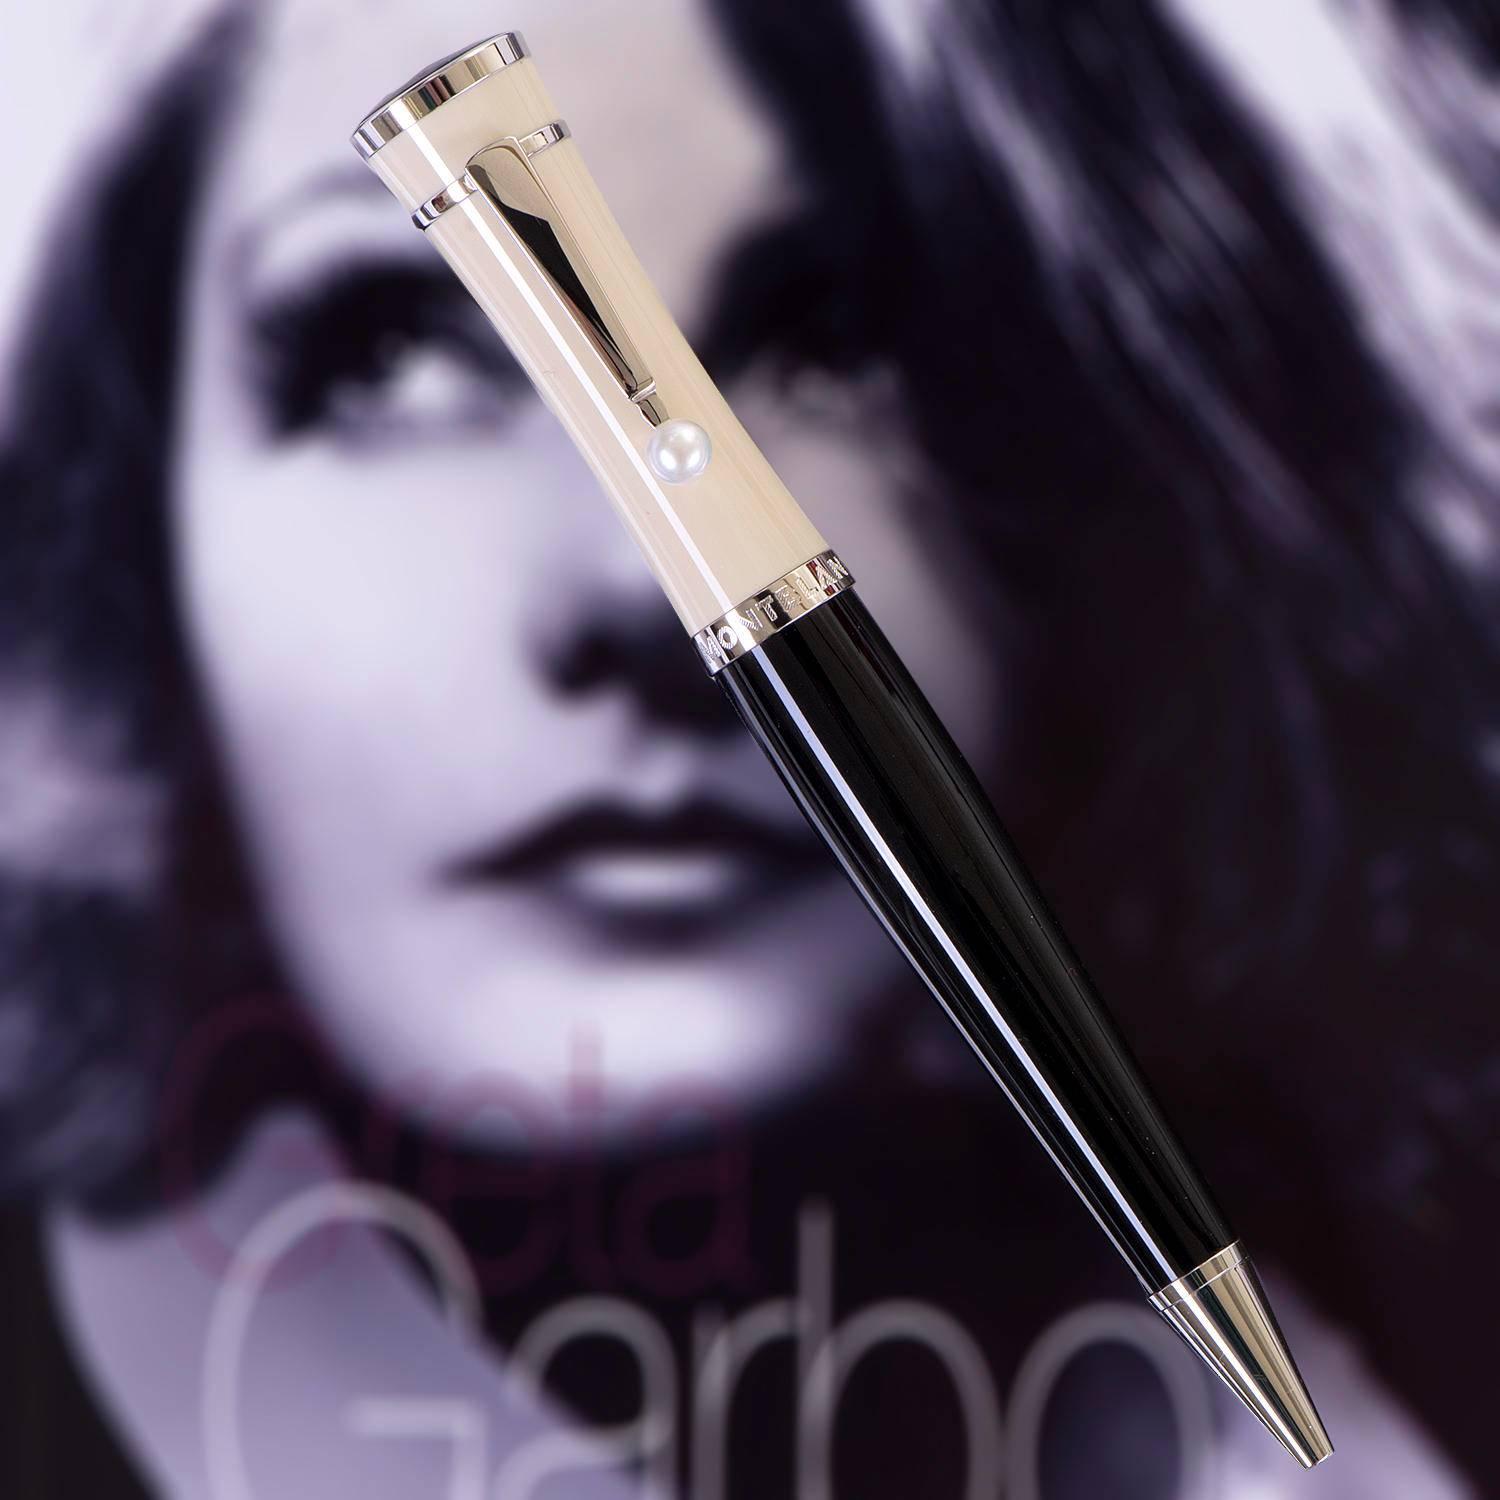 This exquisite Pen - 'Greta Garbo' by Mont Blanc is in complete, Pristine 'Store-Fresh' condition. This fantastic, special gift is a Limited edition piece and comes complete with it's outer gift box, presentation box, International Tribute Book &